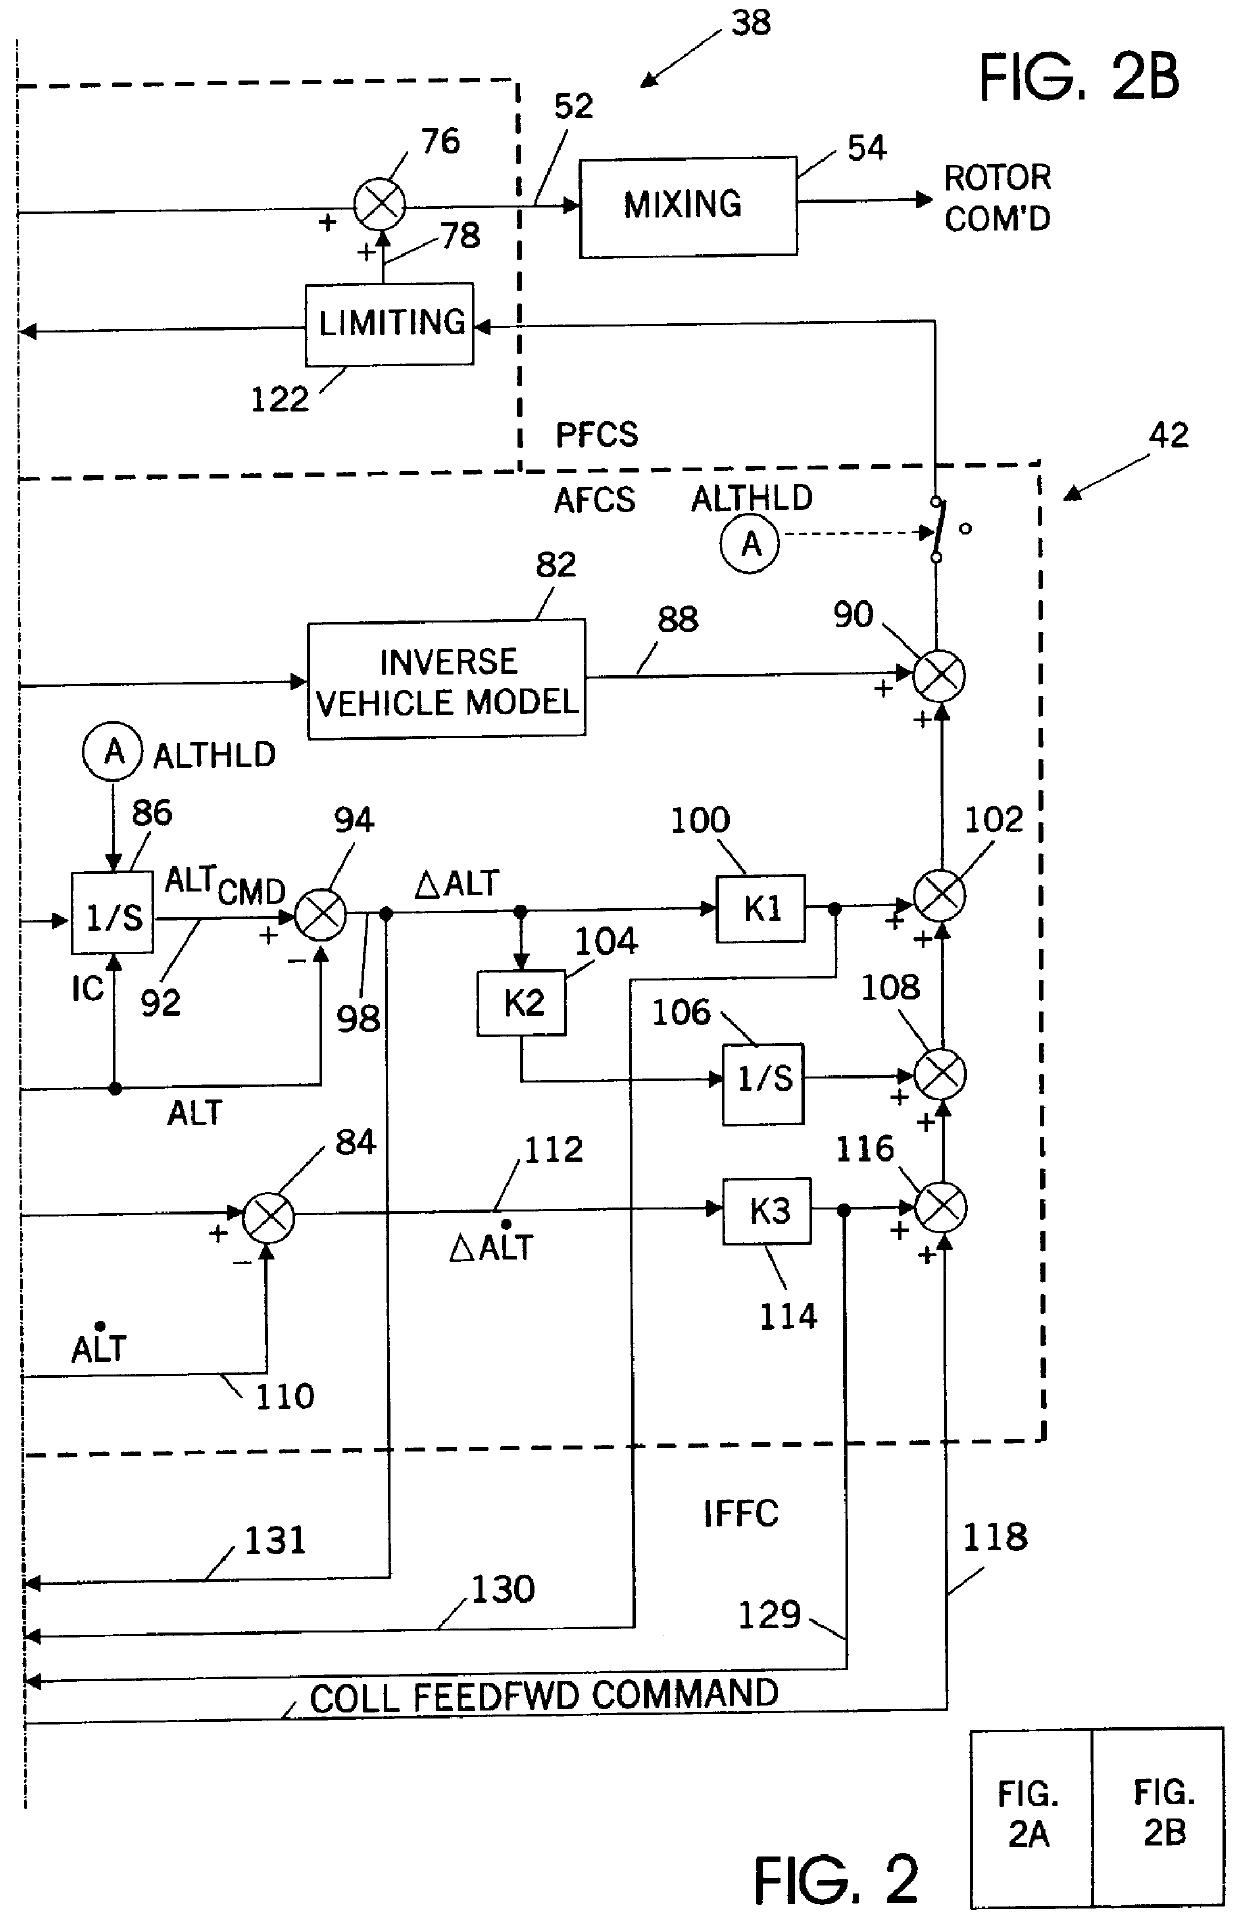 Integrated fire and flight control system with automatic engine torque limiting